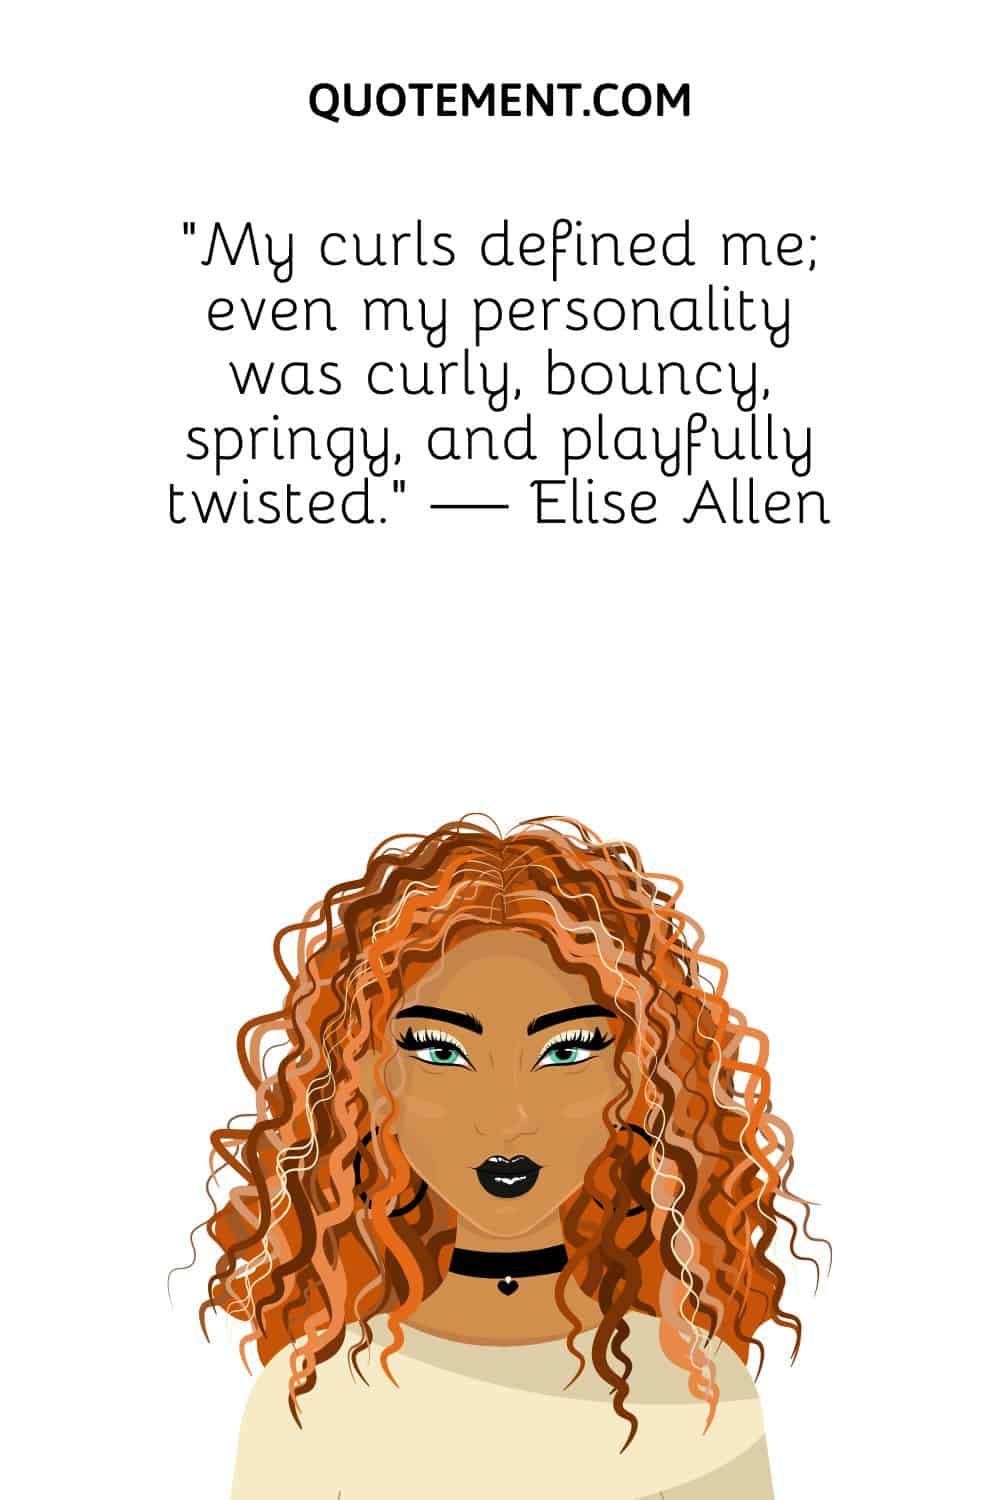 My curls defined me; even my personality was curly, bouncy, springy, and playfully twisted